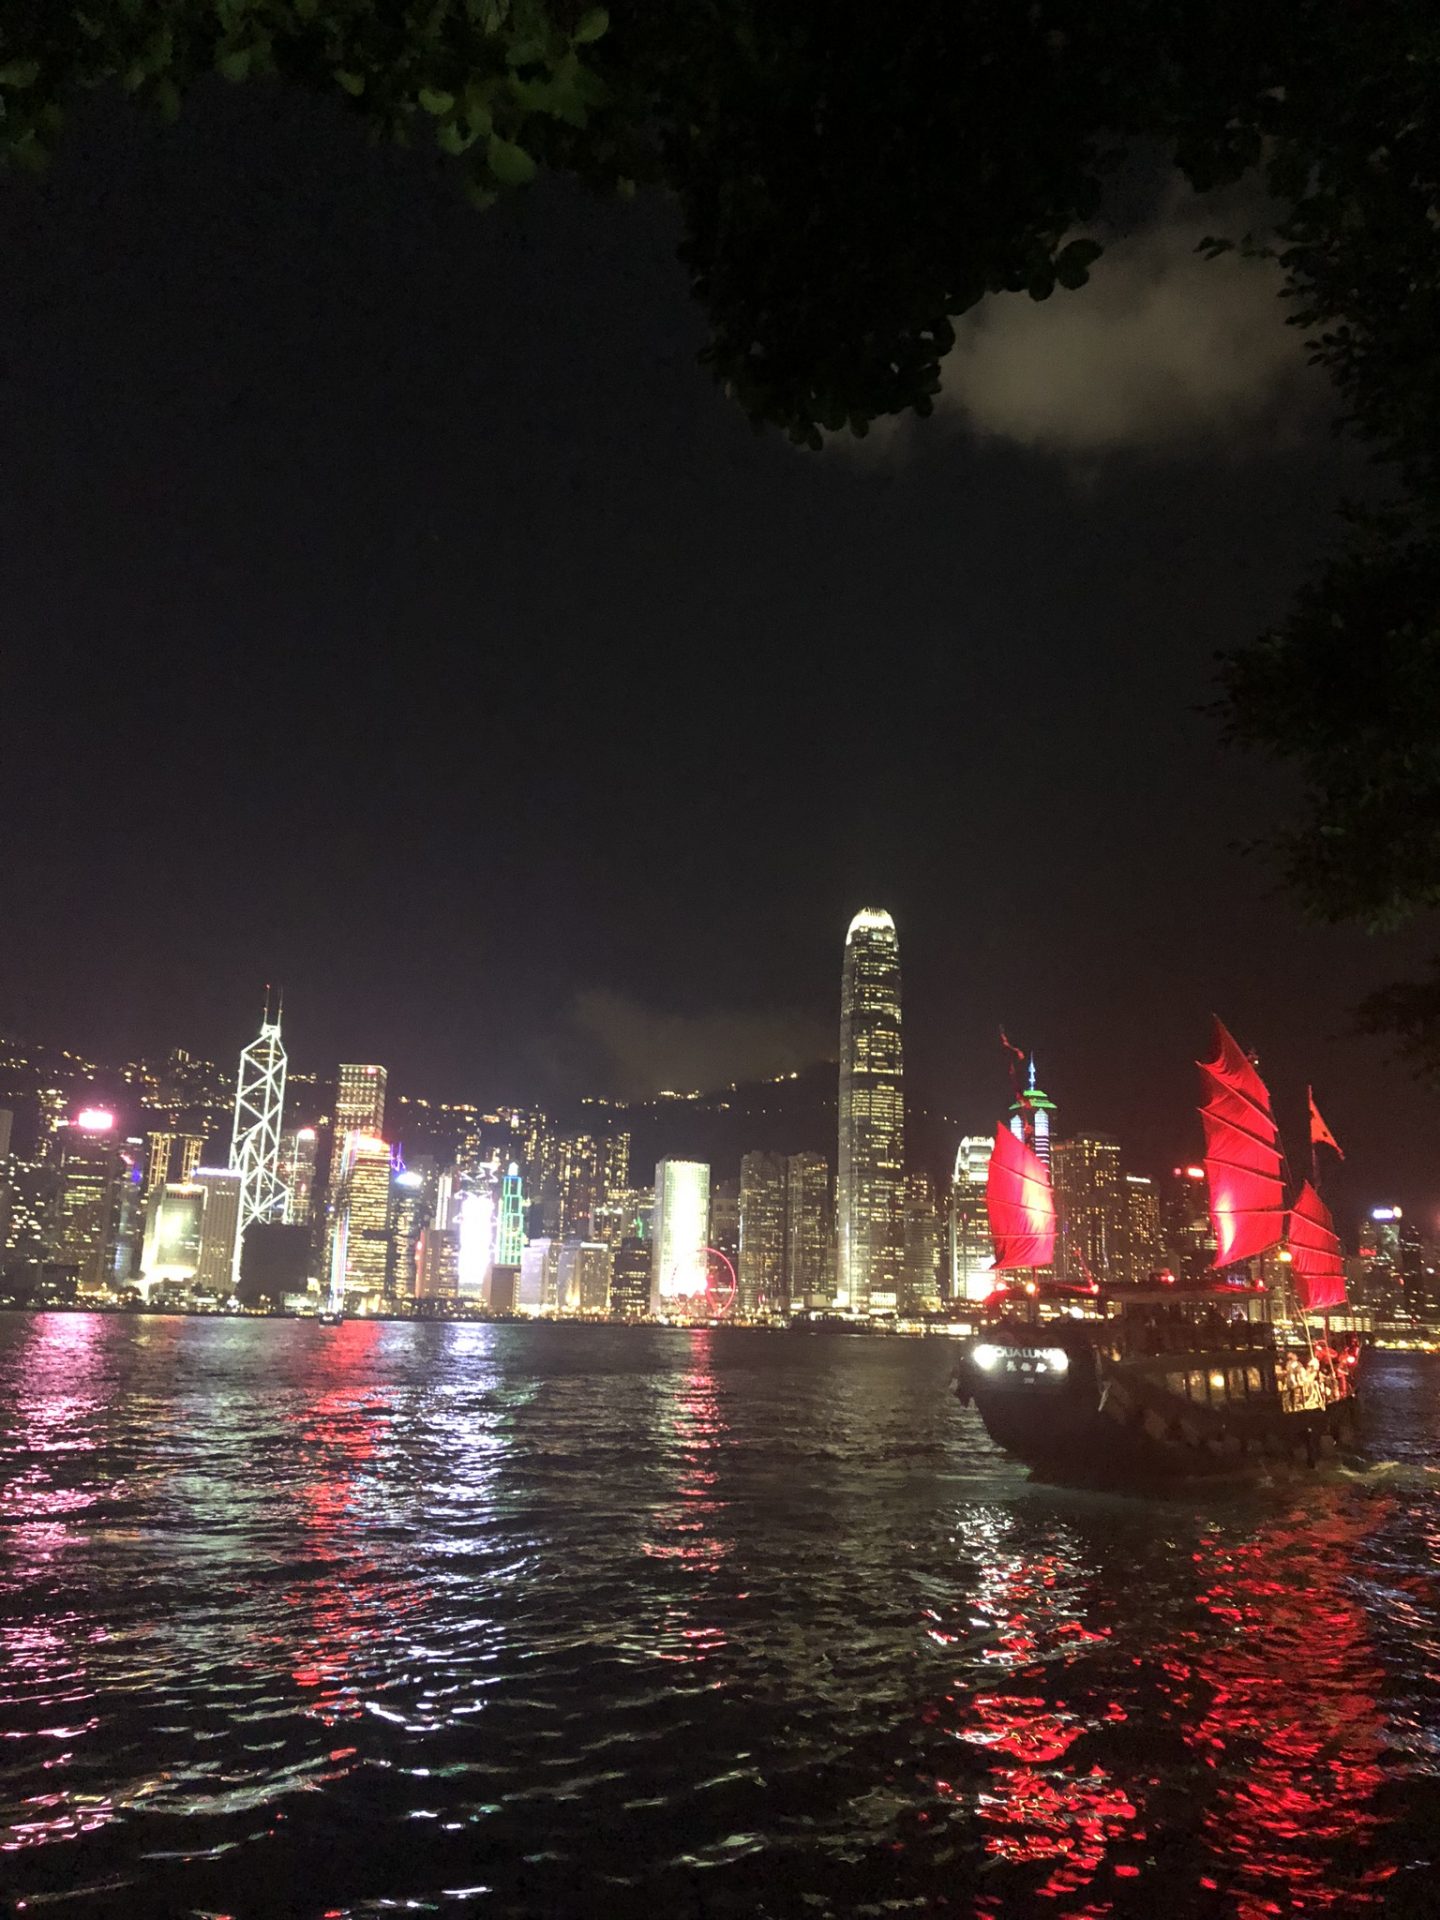 Sailboat on Victoria Harbour at night